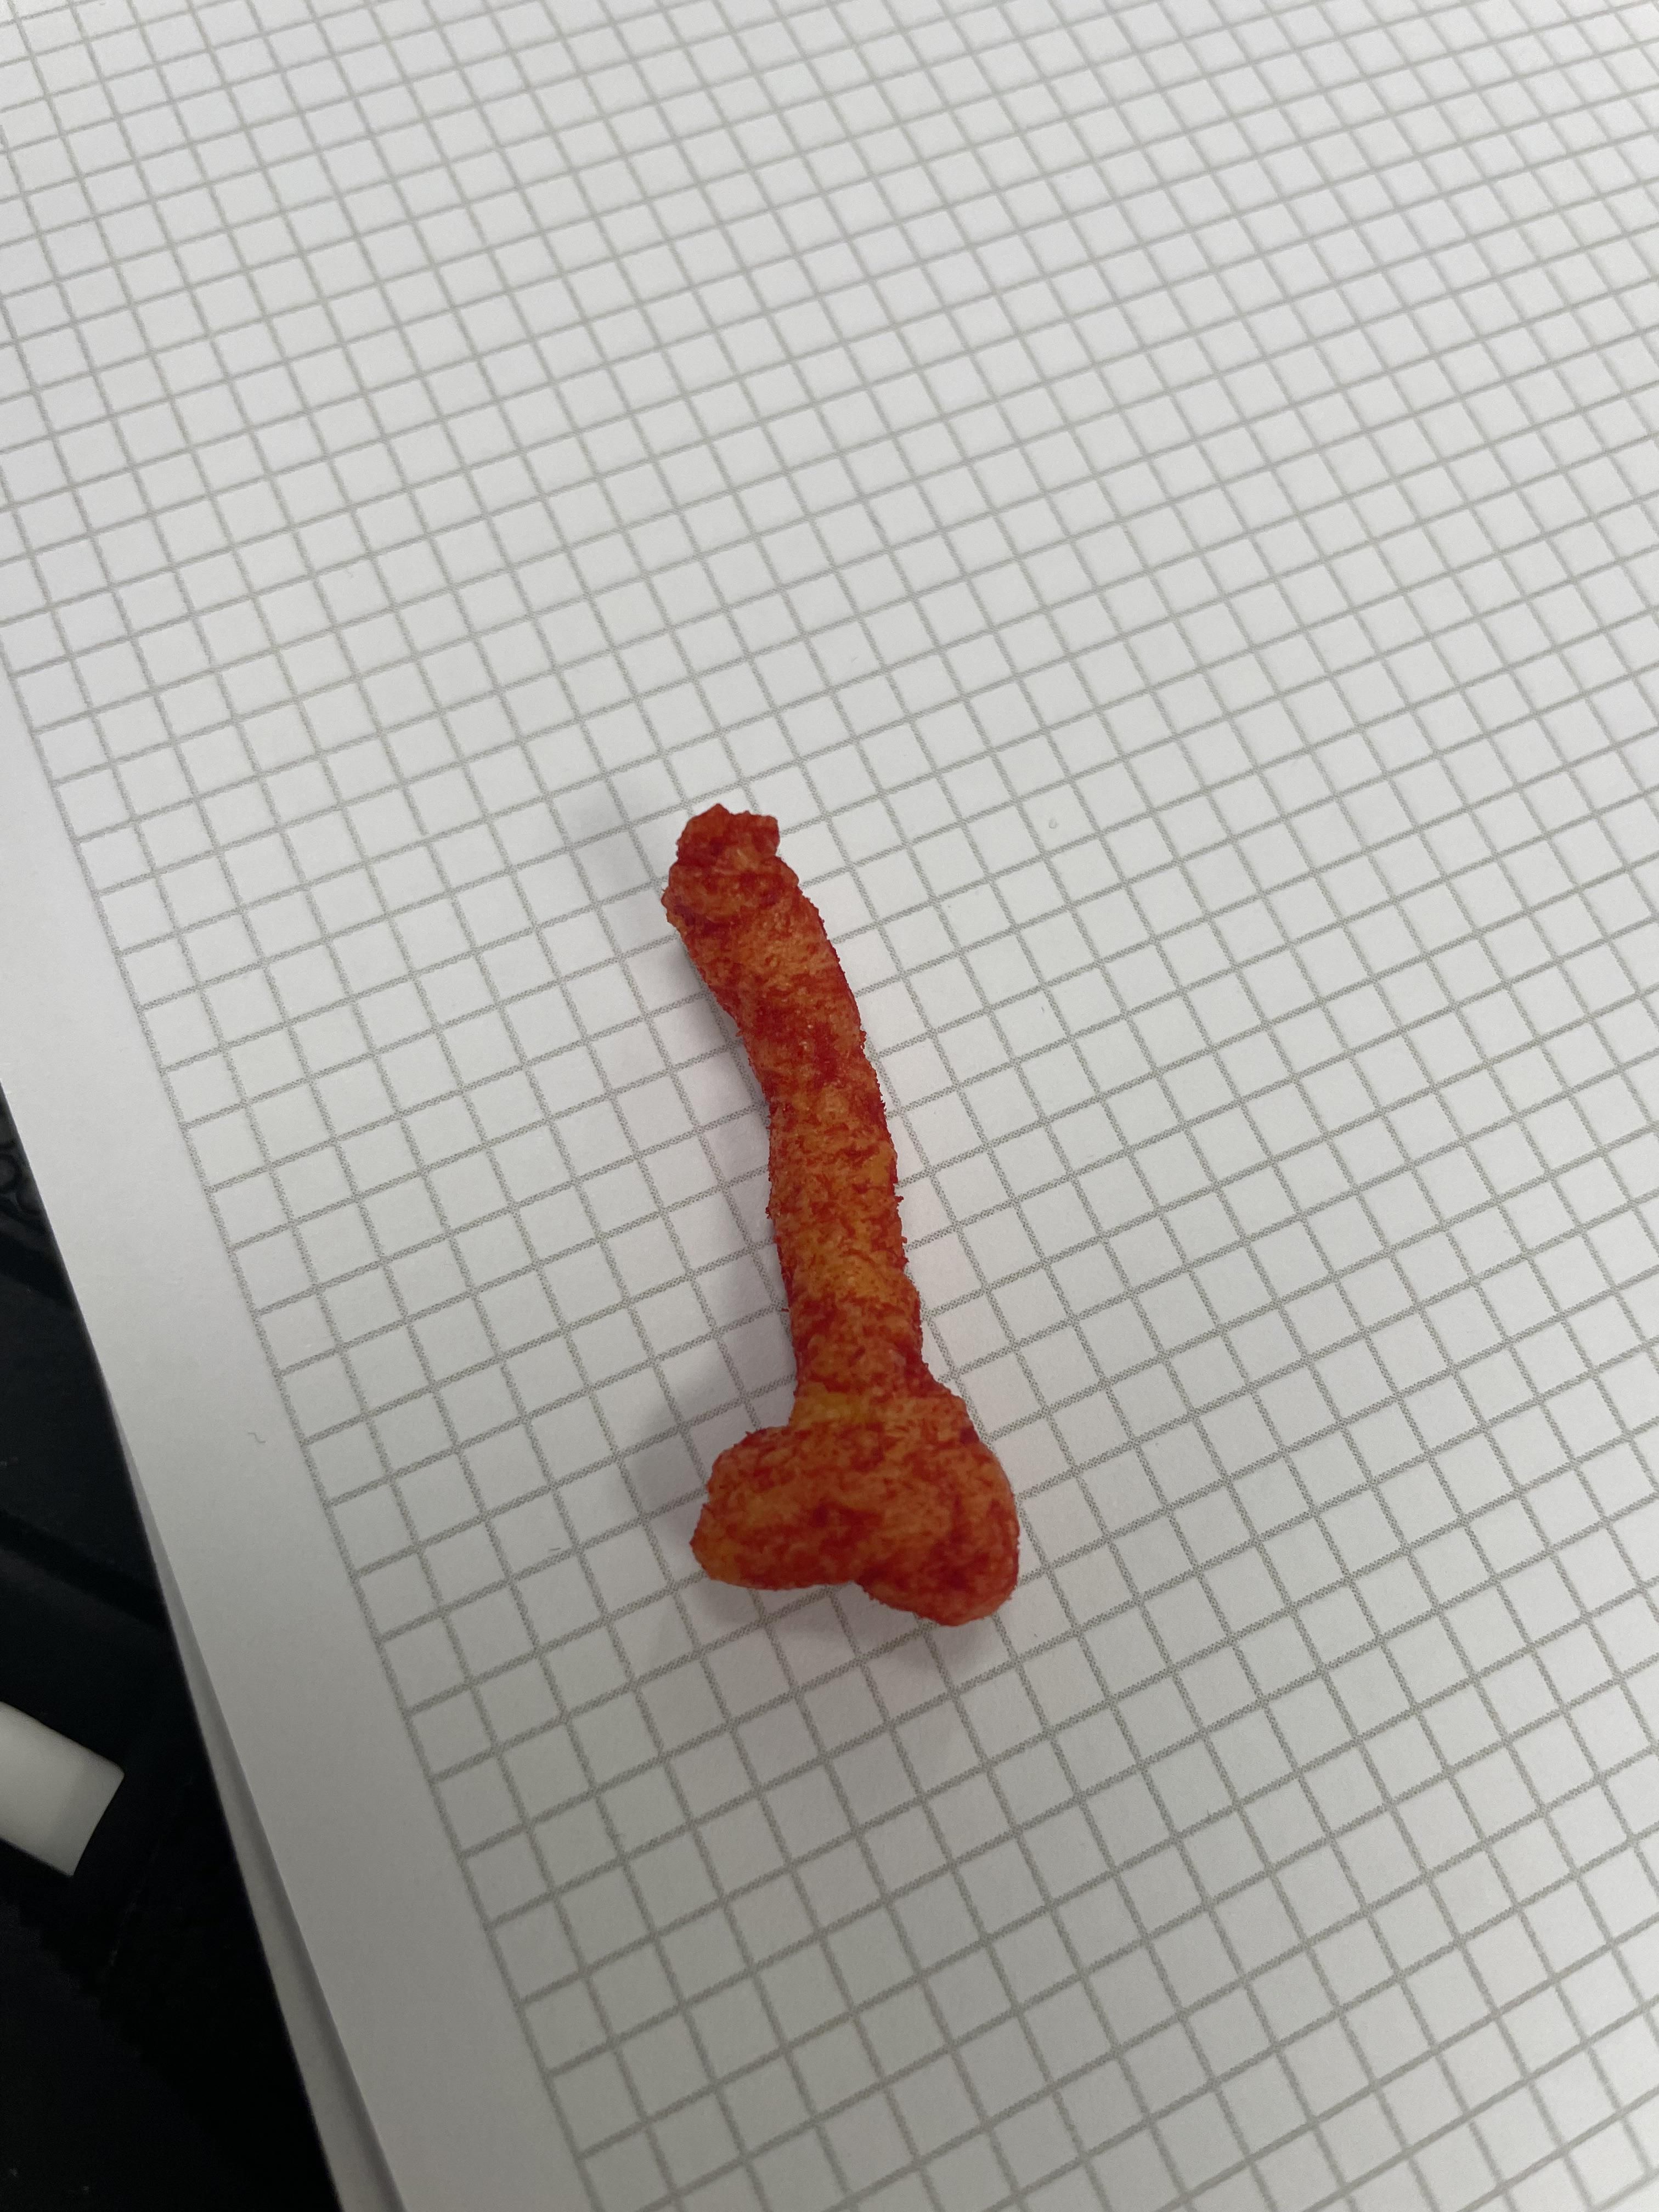 My coworker pulled this out of the Cheetos bag.